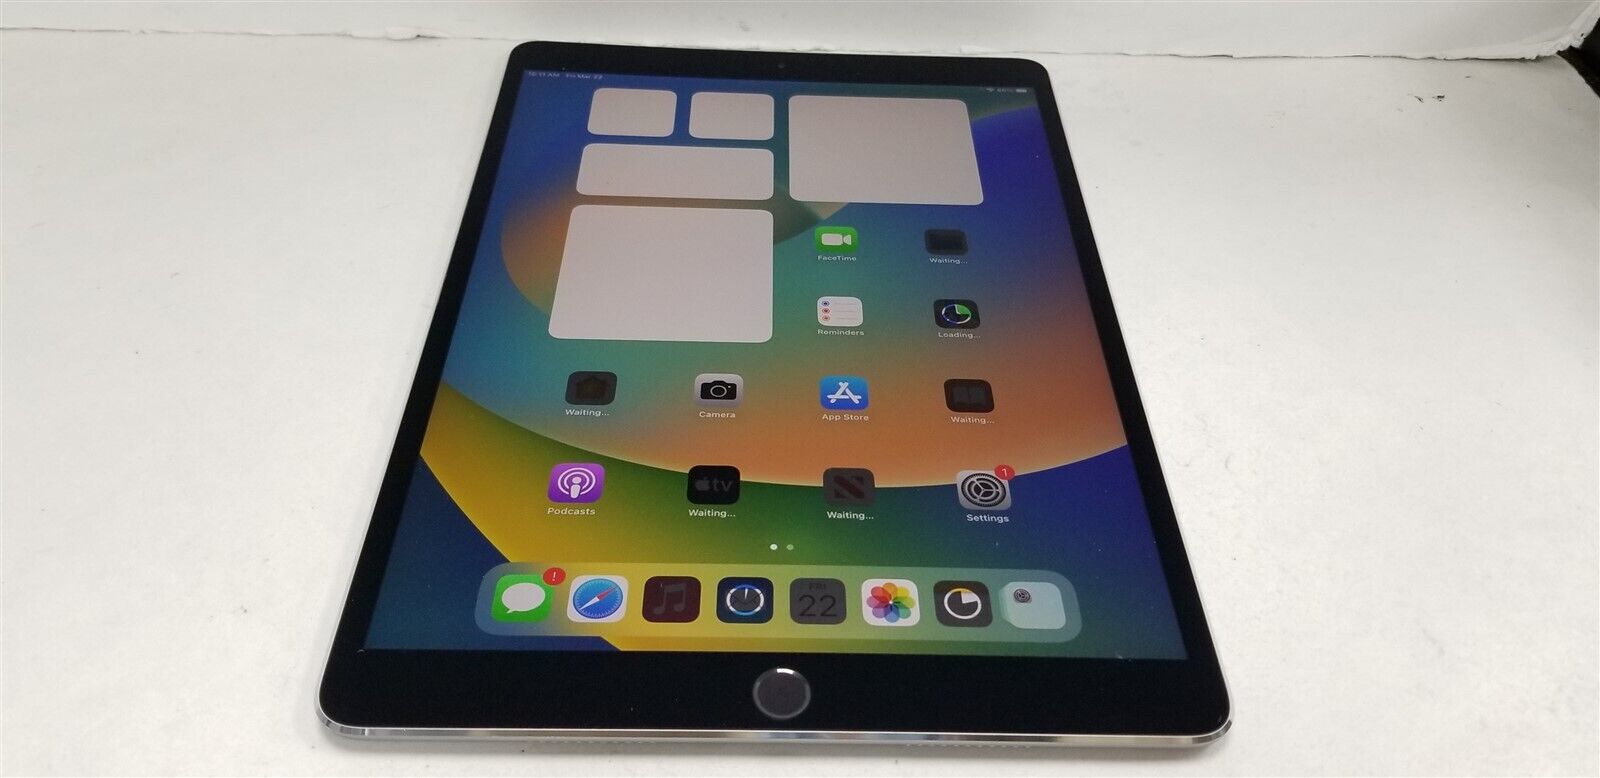 Apple iPad Pro 1st Gen 64gb Space Gray 10.5in A1701 (WIFI) Reduced NW9198